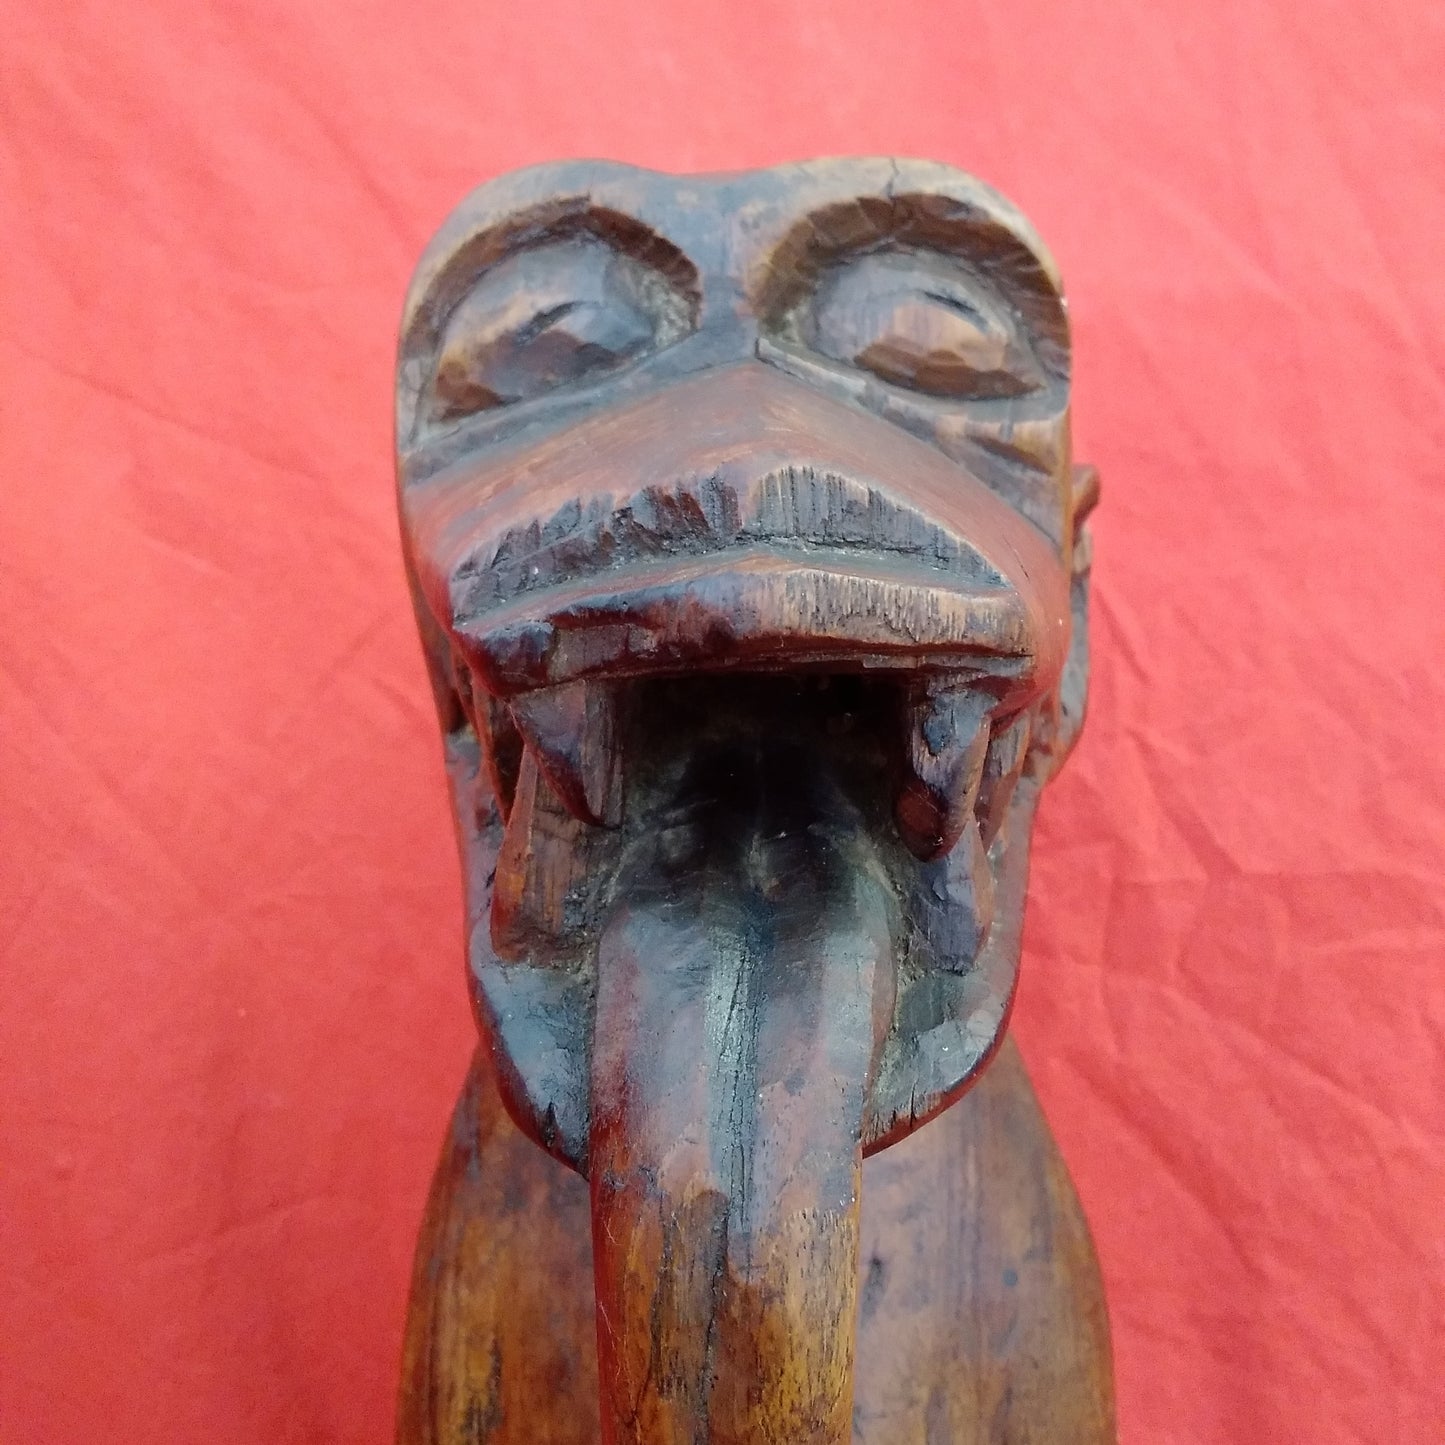 Vintage - 24" Wood Carving from Ghana of a Monkey Drinking from a Coconut